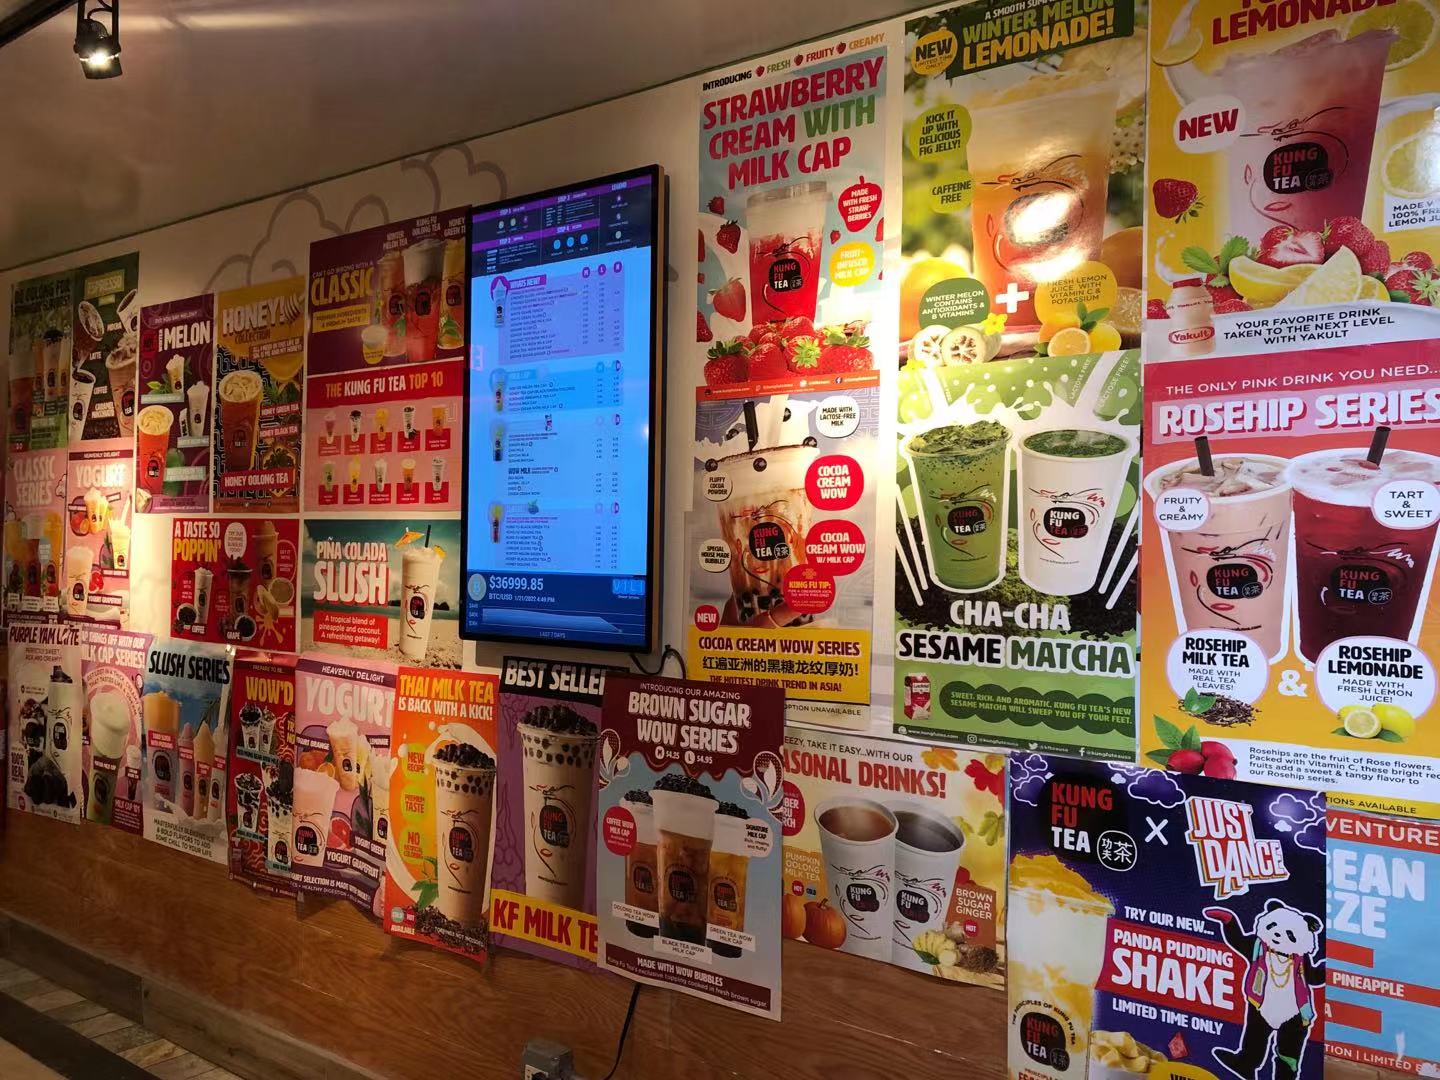 Inside Kung Fu Tea in Champaign, Illinois, there are boba tea posters and a black flat touch-screen in the center. Photo by Xiaohui Zhang.